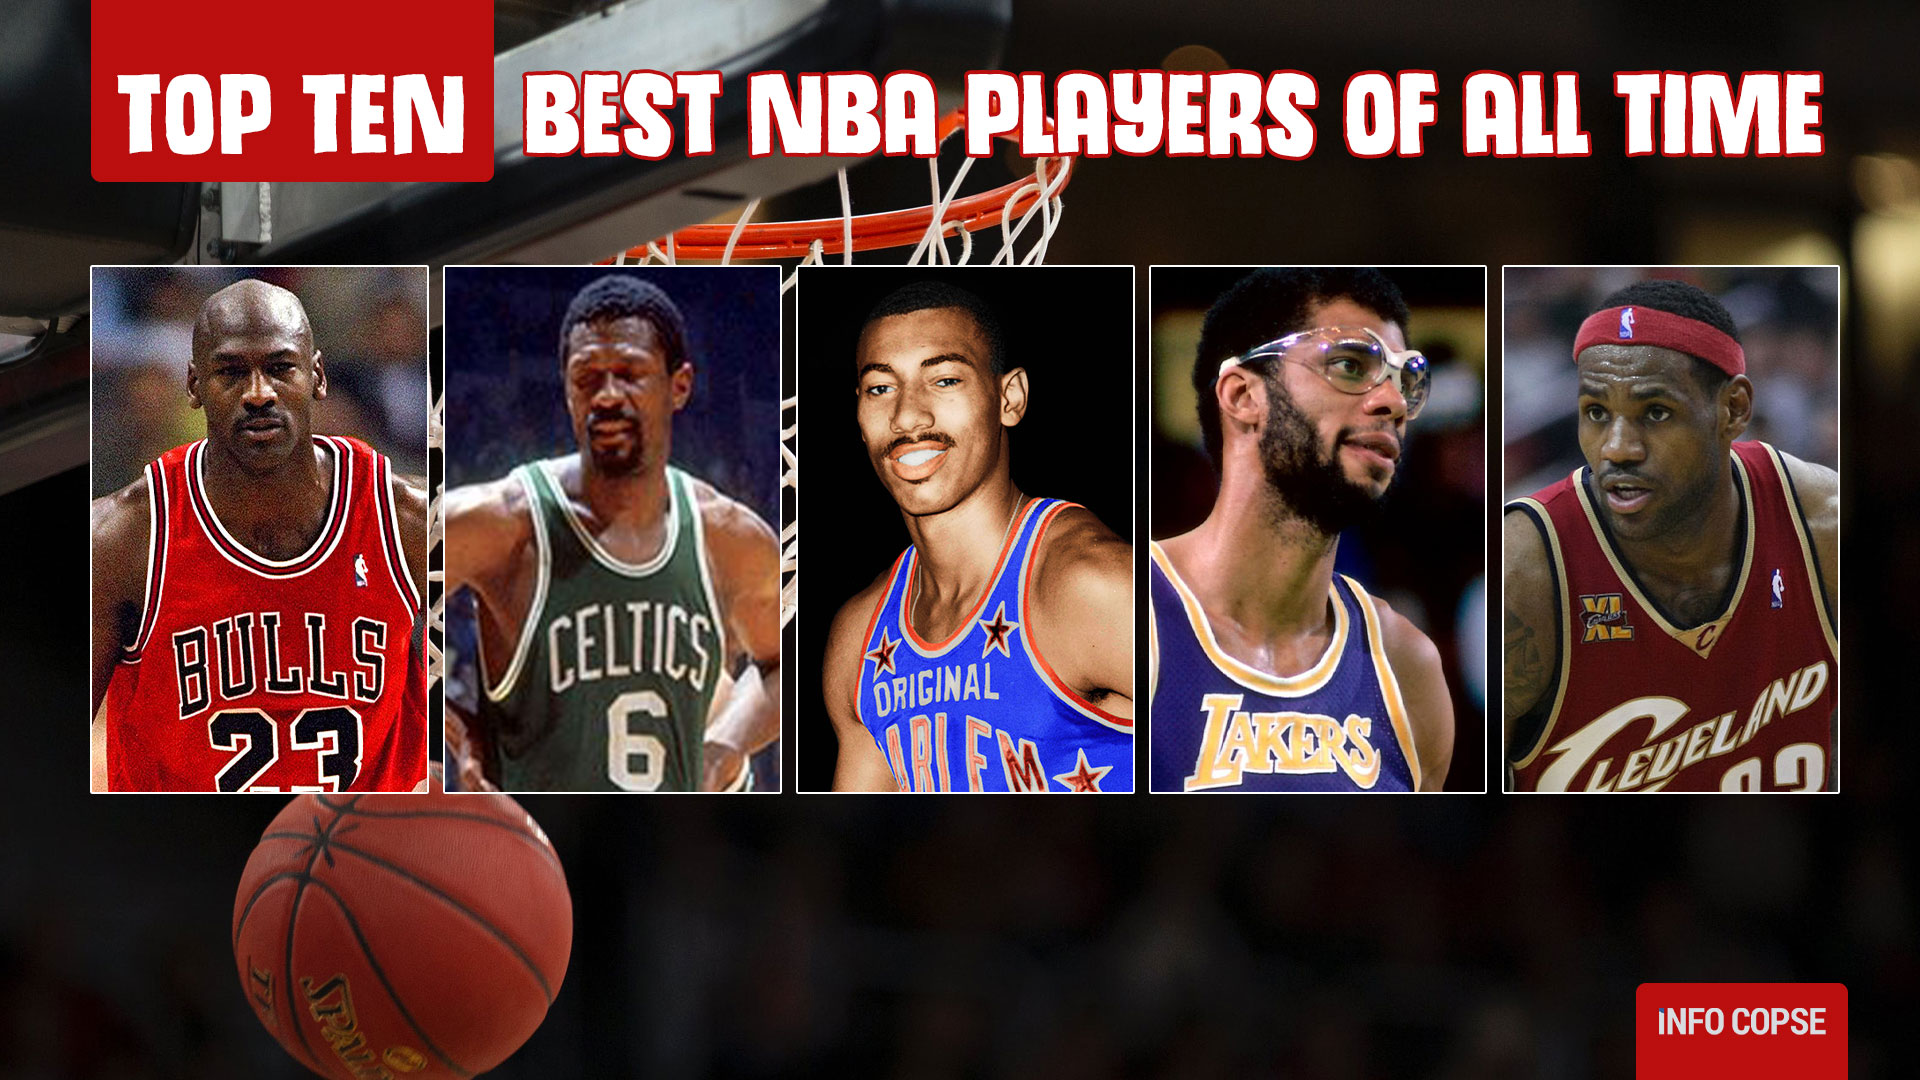 Top 10 Basketball Players Of All Time Online Cheap, Save 49 jlcatj